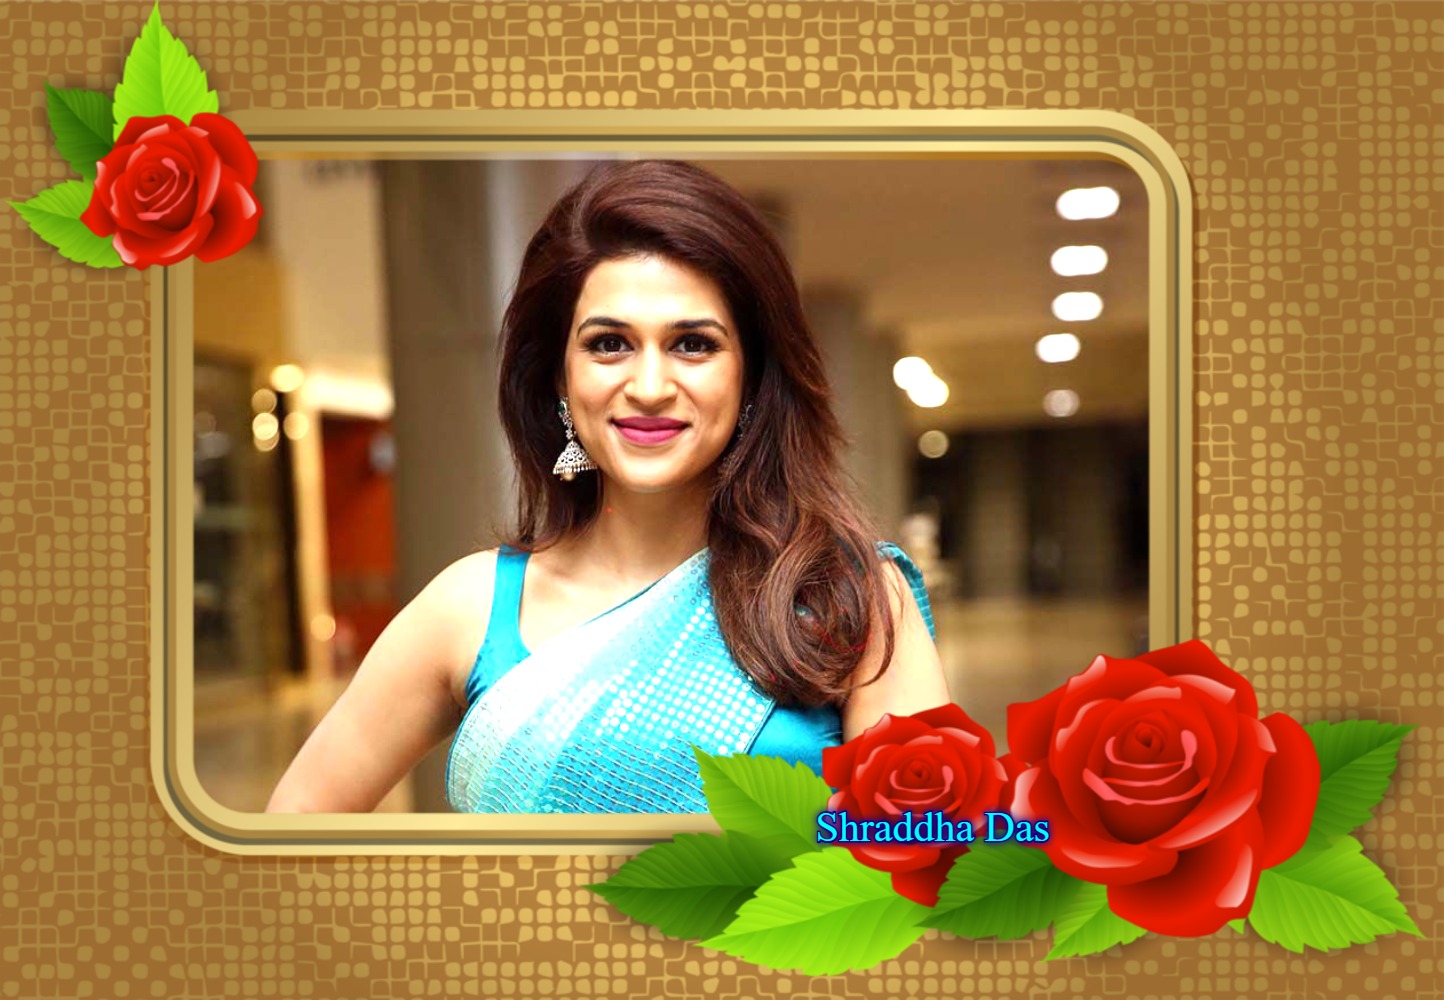 Read more about the article “Shraddha Das – Inching Her Way To Superstardom”